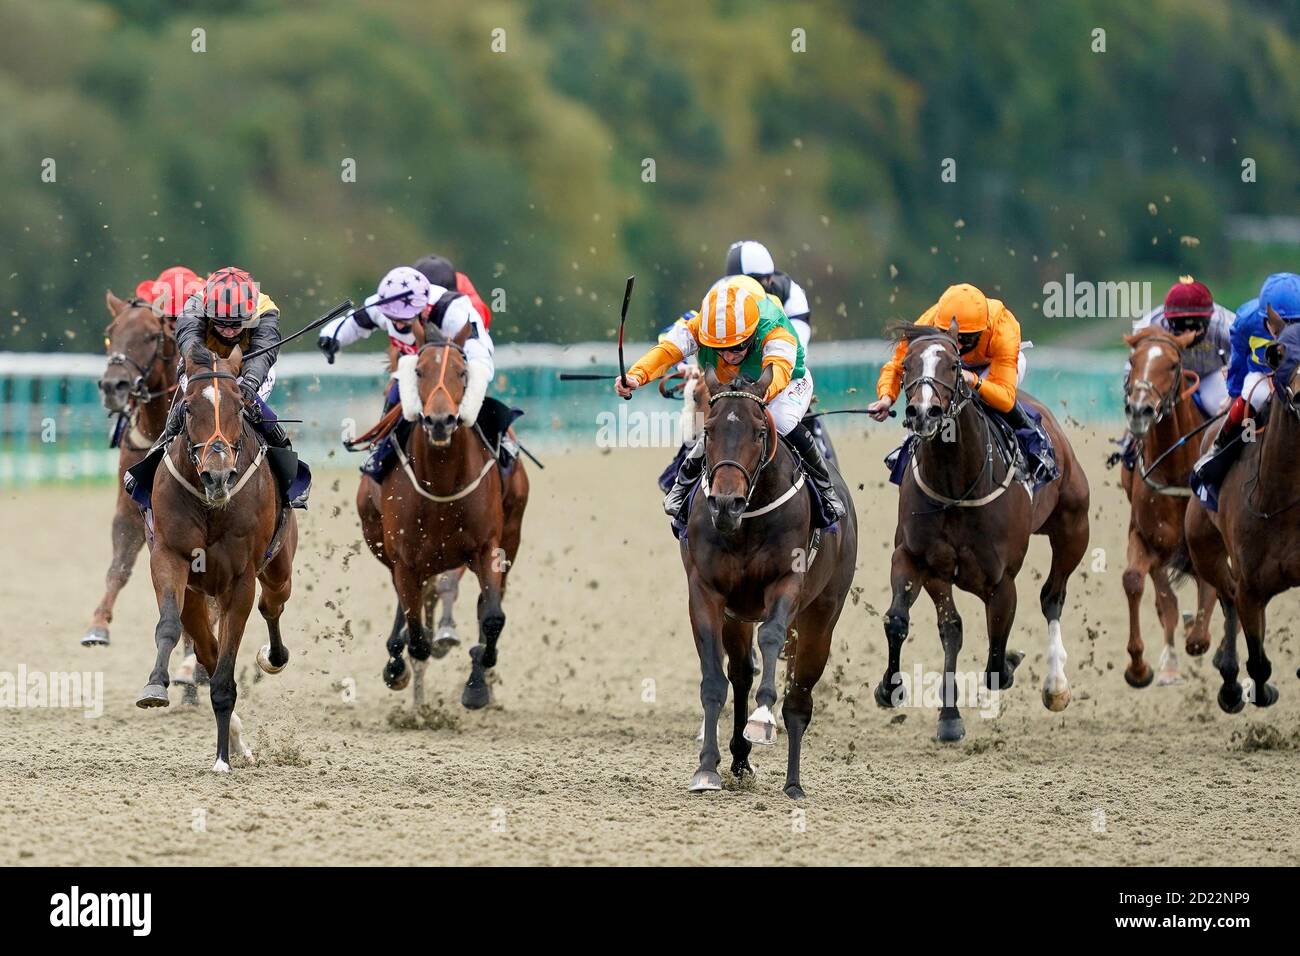 David Probert riding Accomplice (left) win The Read Andrew Balding On Betway Insider Handicap at Lingfield Park at Lingfield Park Racecourse. Stock Photo